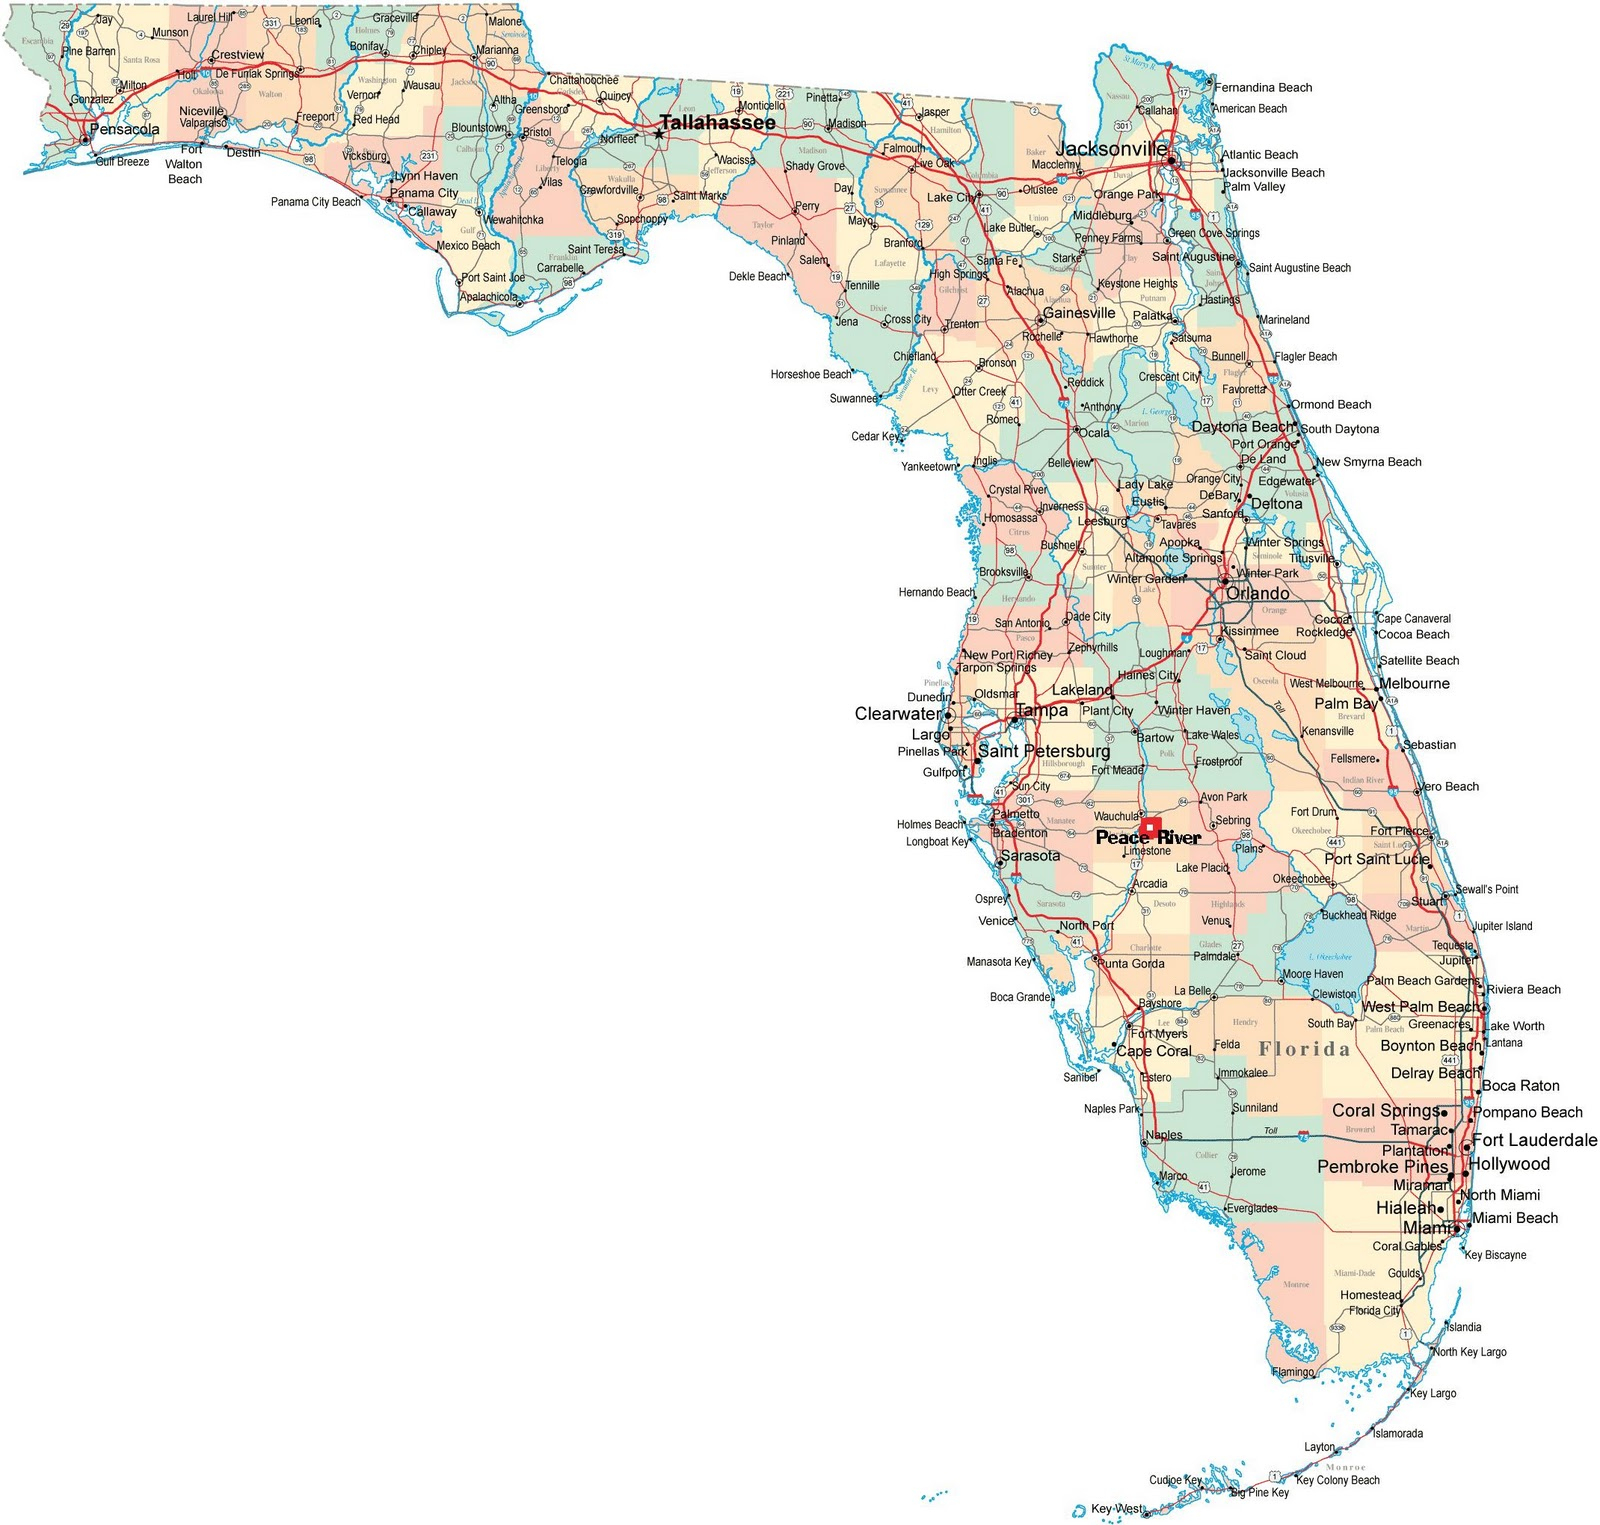 The Pauls&amp;#039; Revolution : Peace River And Orlando Thousand Trails - Thousand Trails Florida Map